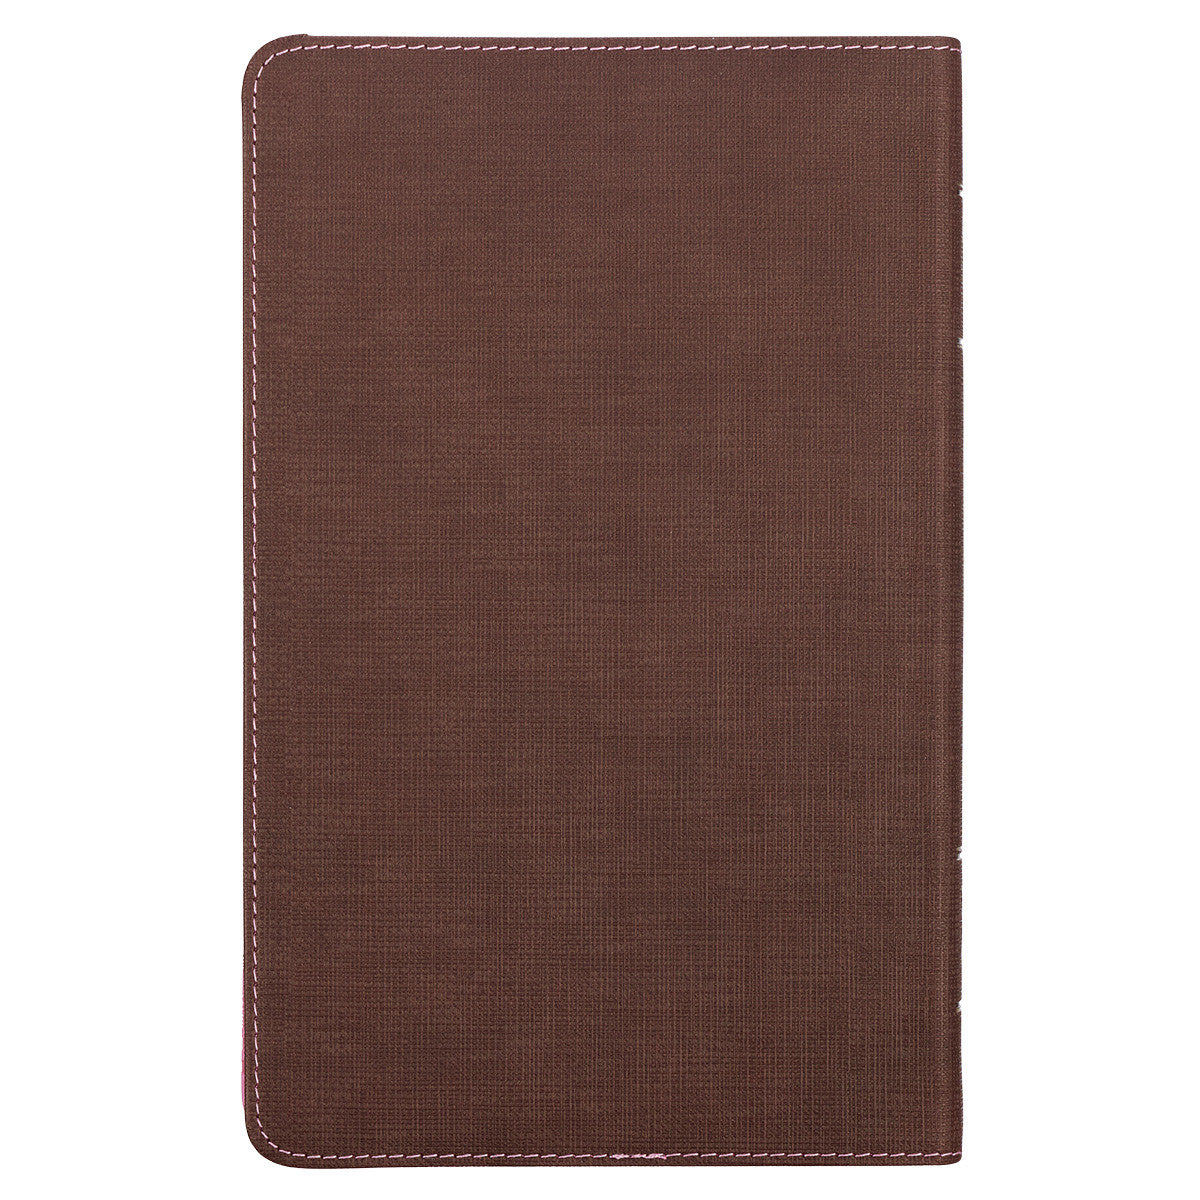 Brown and Berry Pink Faux Leather Giant Print Standard-size King James Version Bible with Thumb Index - The Christian Gift Company